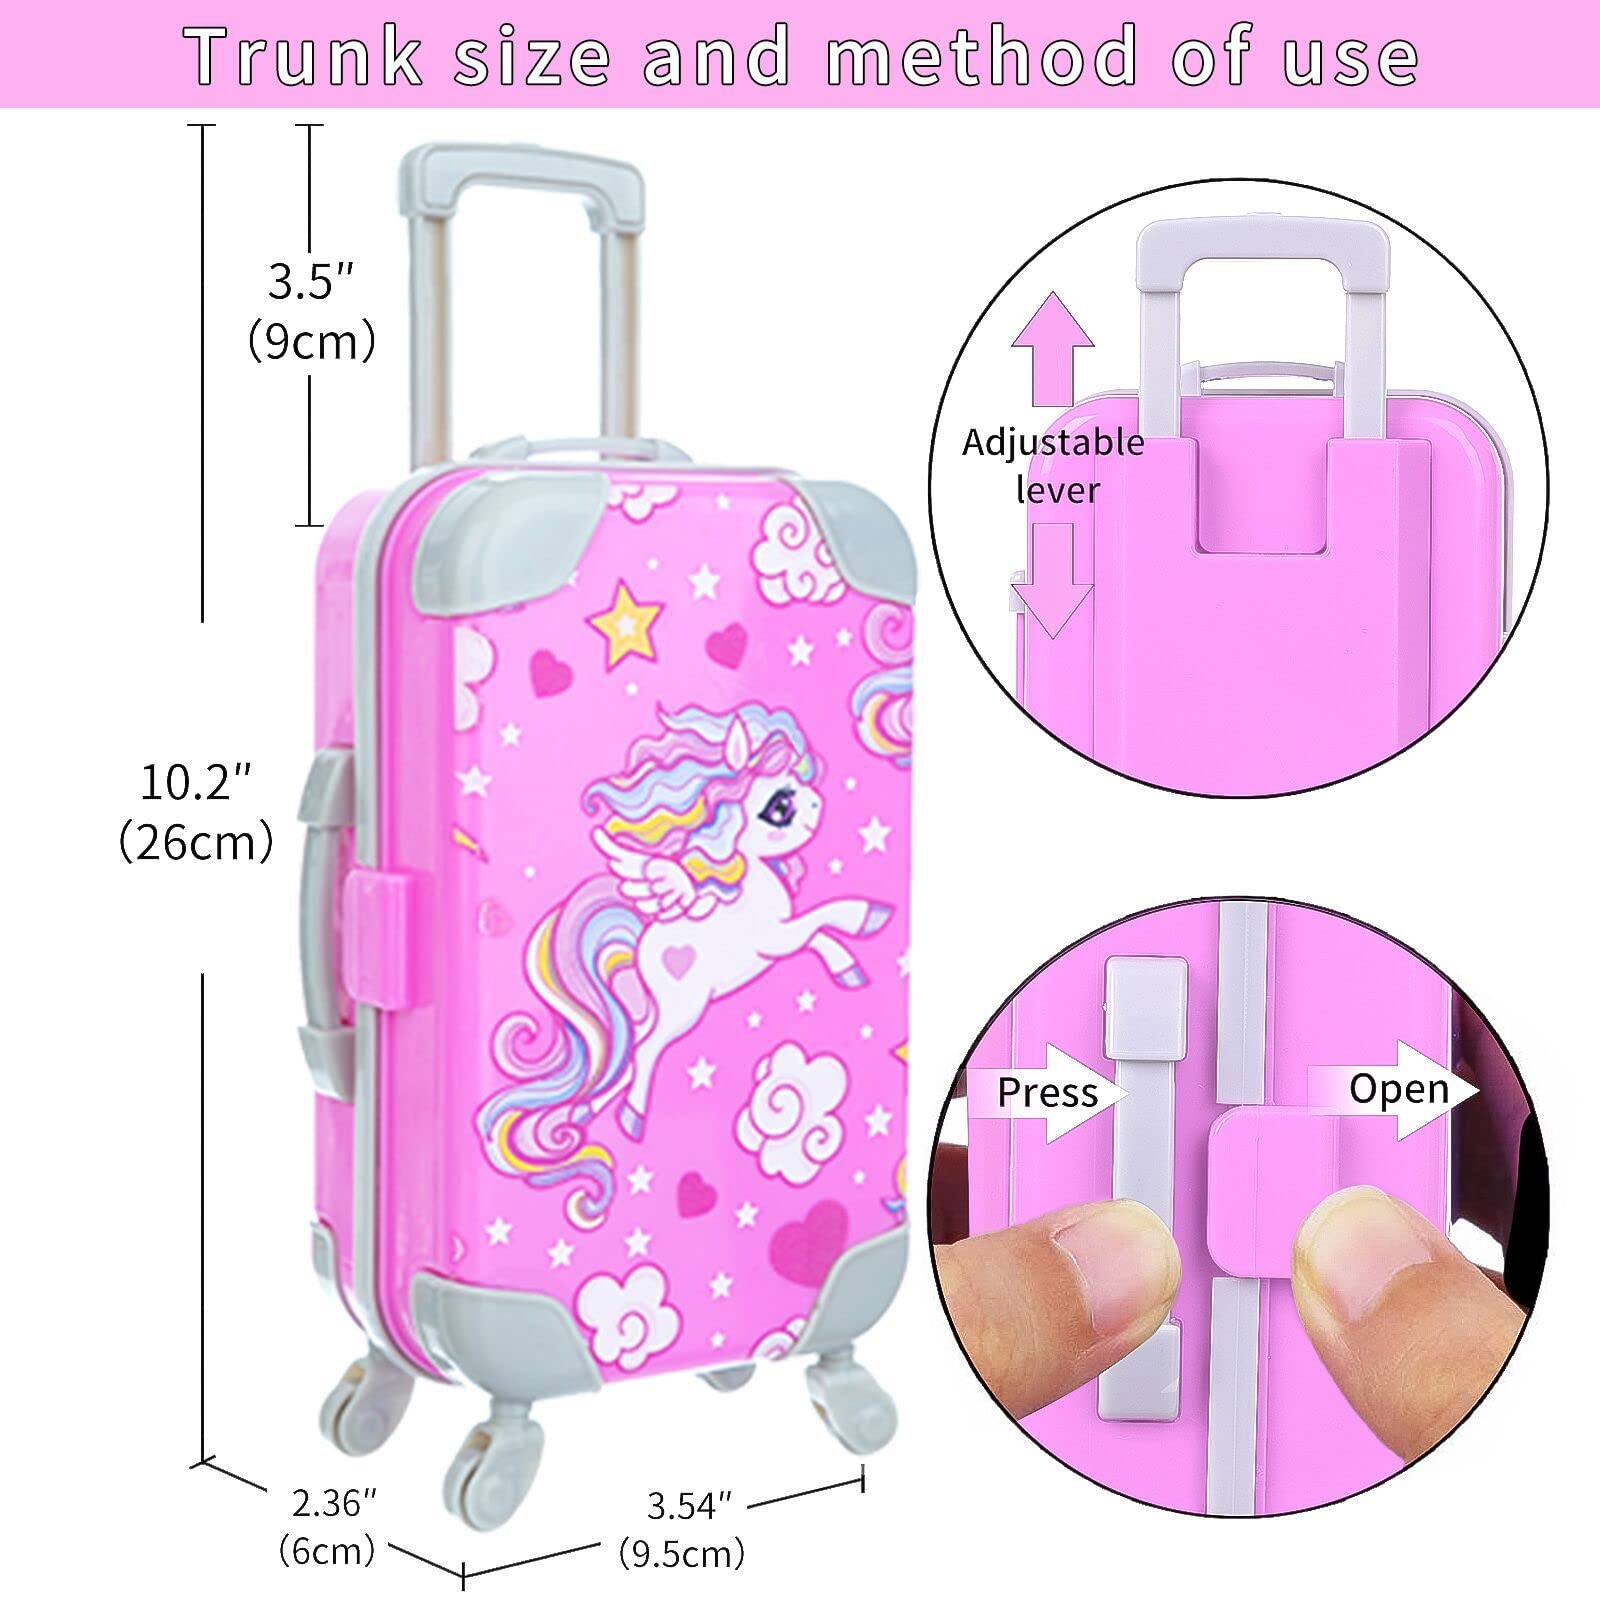 DOTVOSY 29 Pcs American 18 Inch Doll Clothes and Accessories Travel Suitcase Set Designed for 18